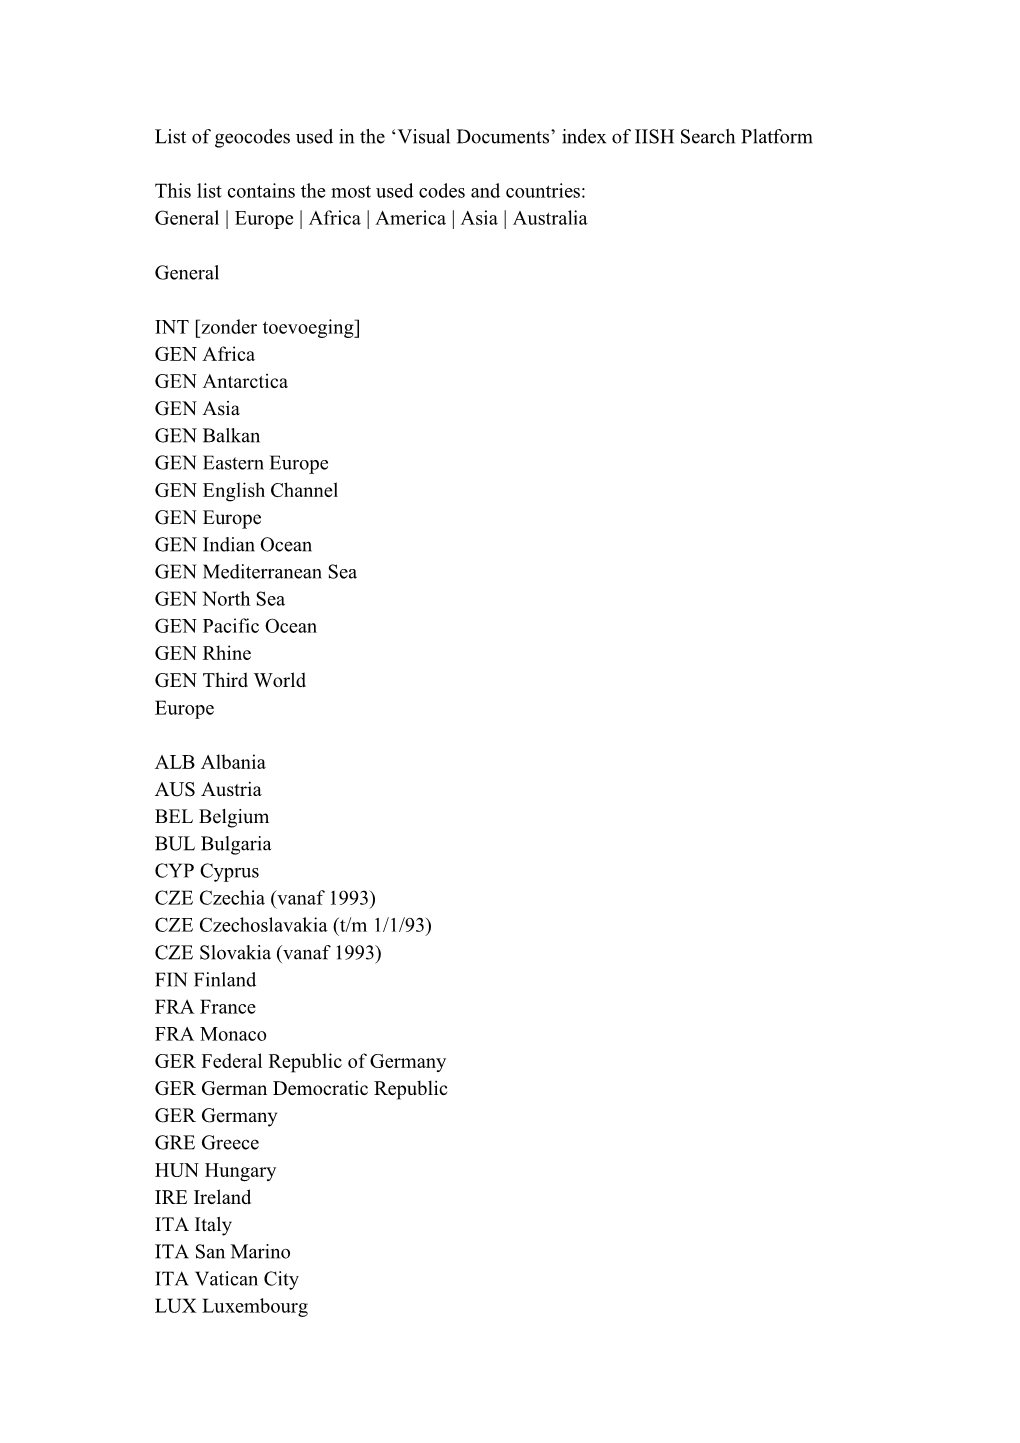 List of Geocodes Used in the 'Visual Documents' Index of IISH Search